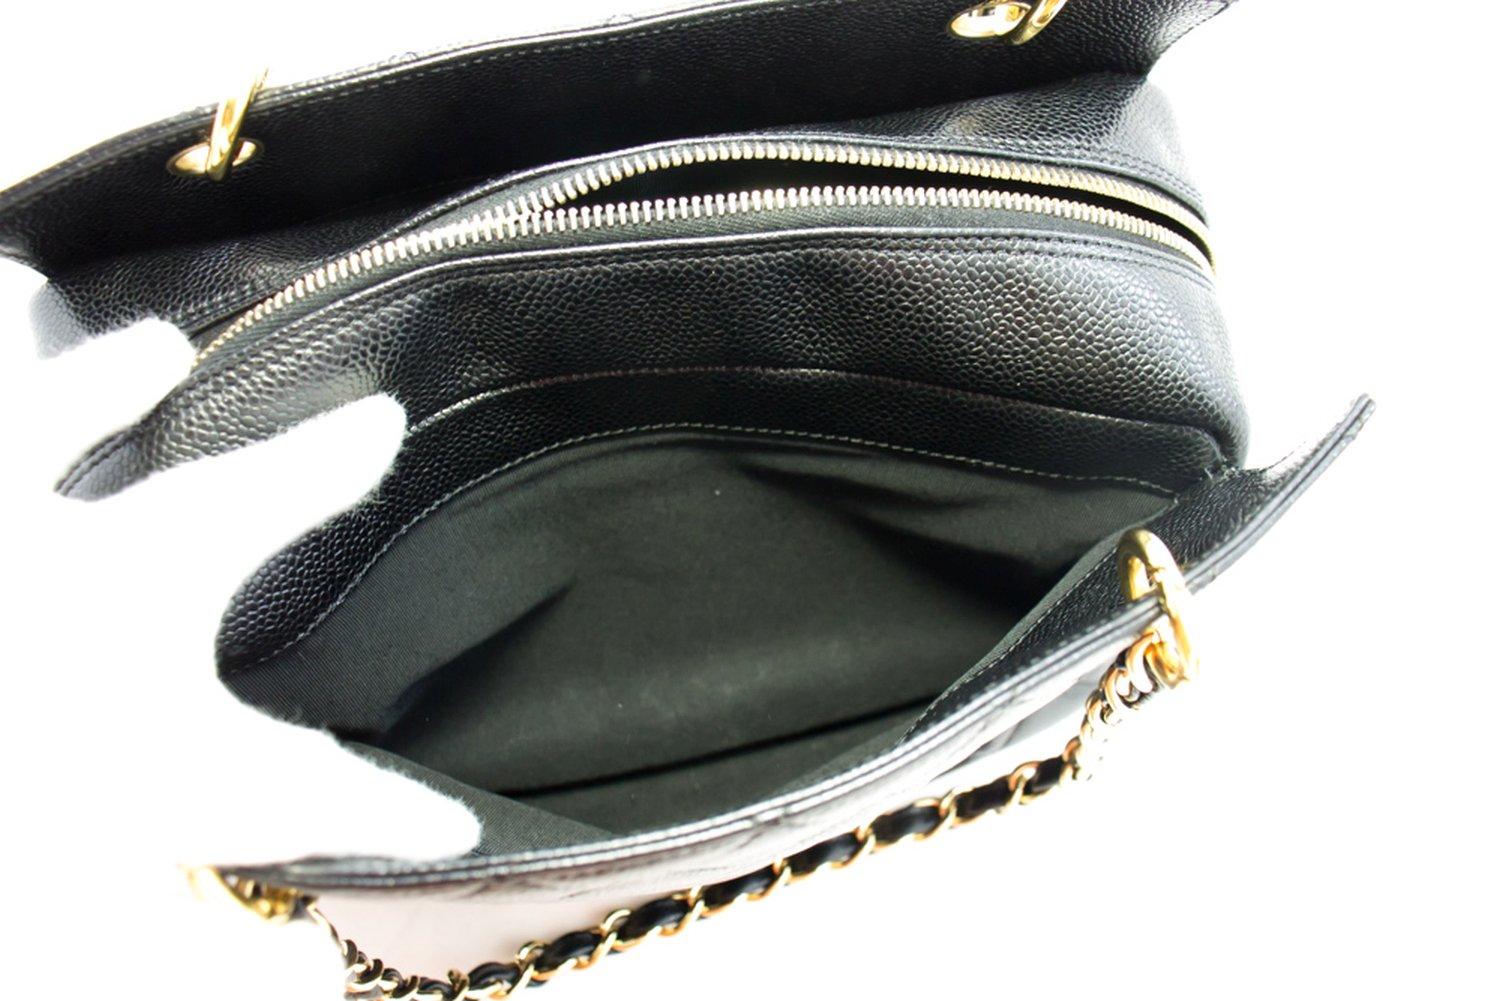 CHANEL Caviar Chain Shoulder Shopping Tote Bag Black Quilted Purse 12